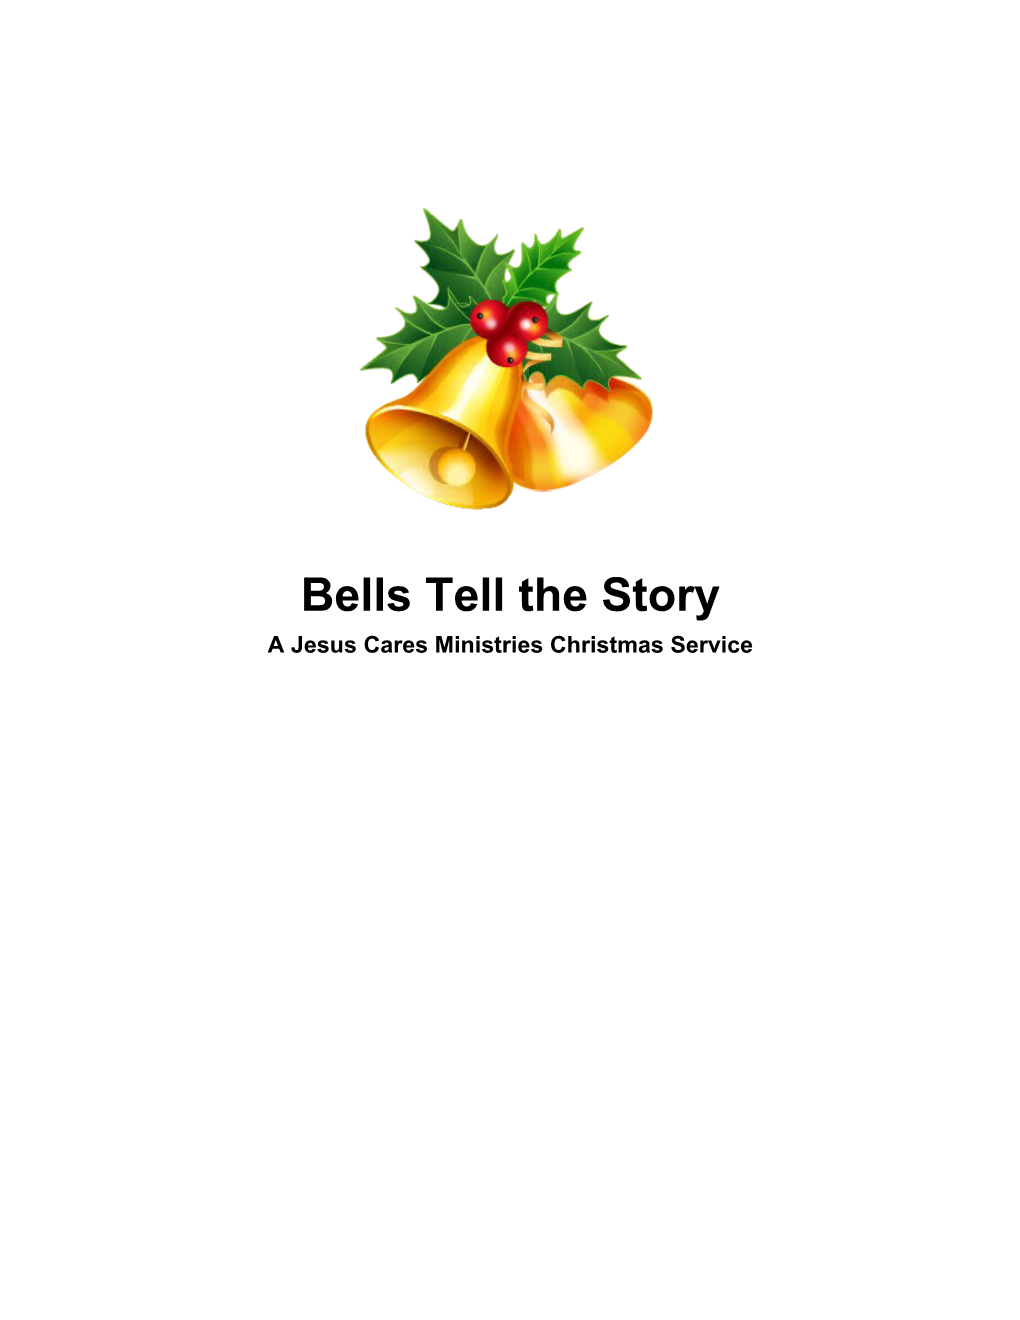 The Bells Tell the Story